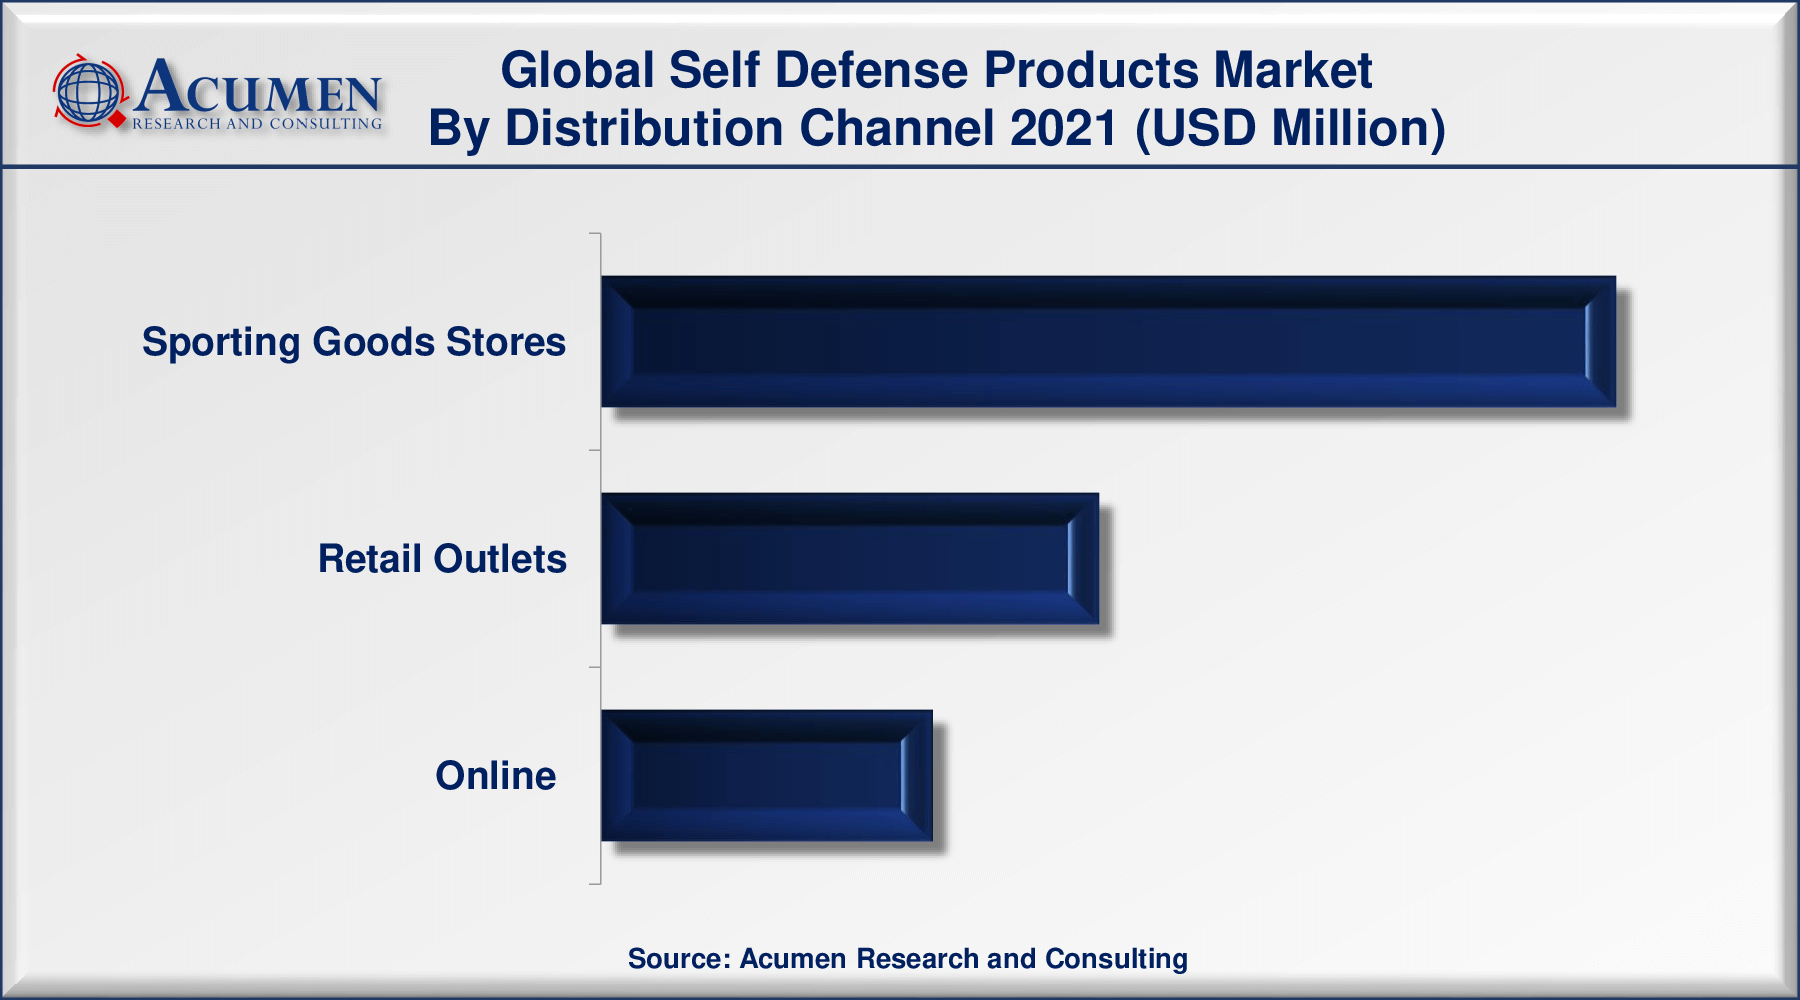 Self Defense Products Market Size was valued at USD 2,874 Million in 2021 and is predicted to be worth USD 4,519 Million by 2030